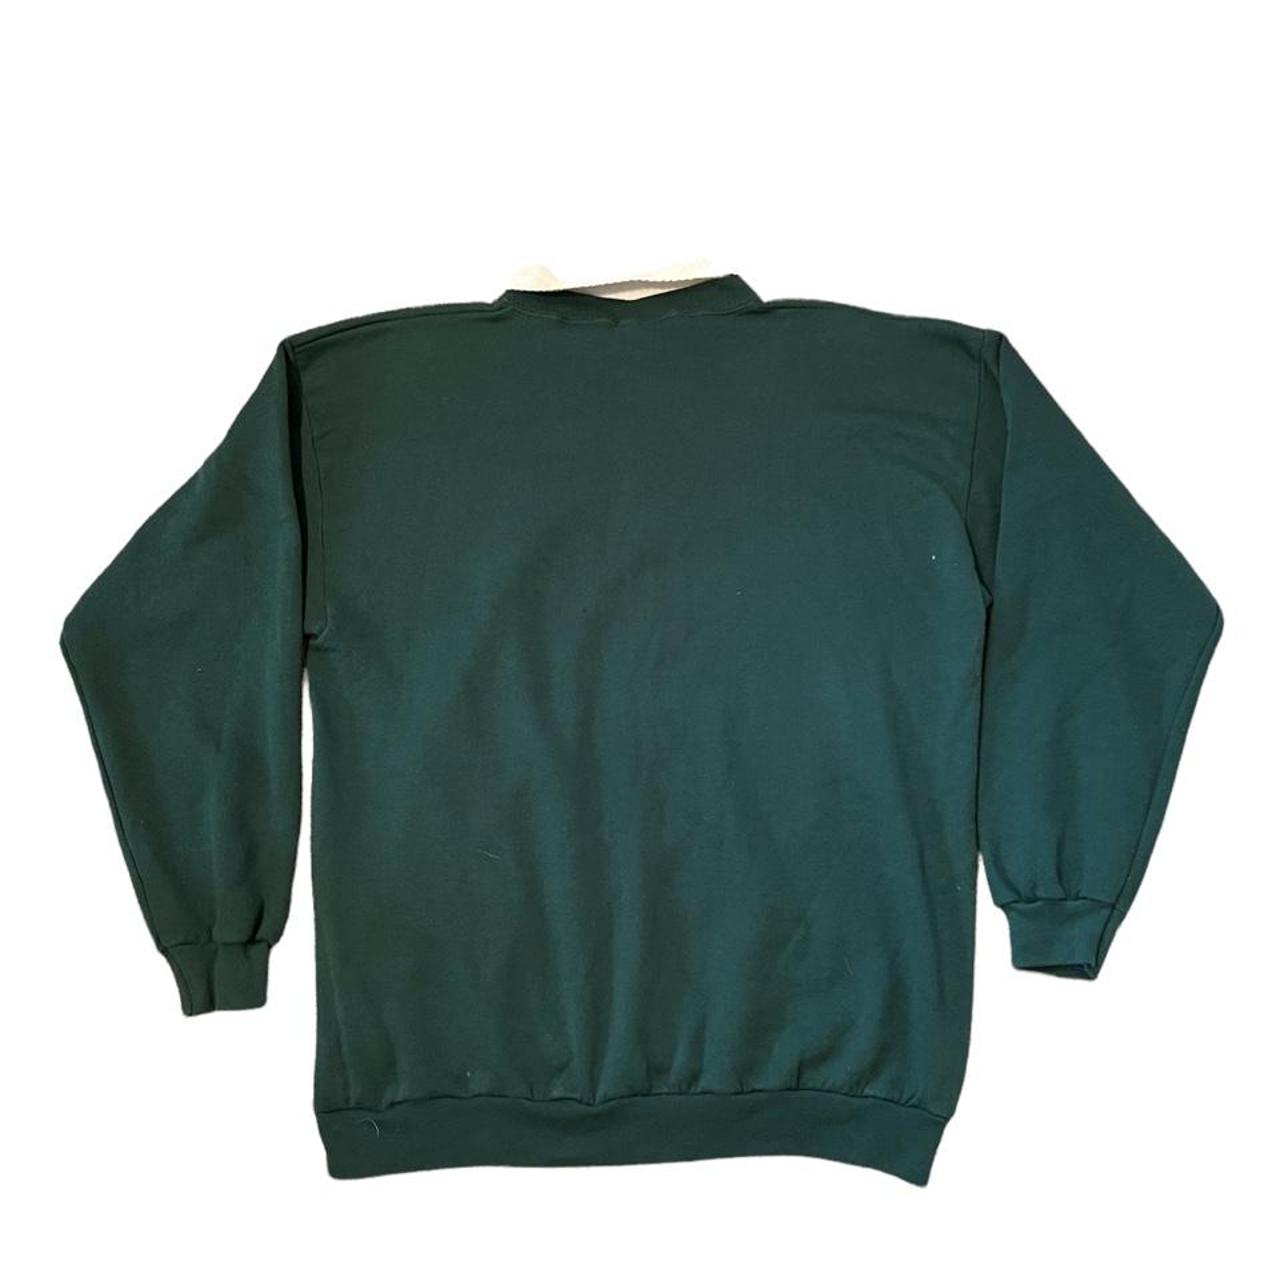 Product Image 2 - Vintage Crewneck

“Country Roads”
Collared 
Cotton Traders